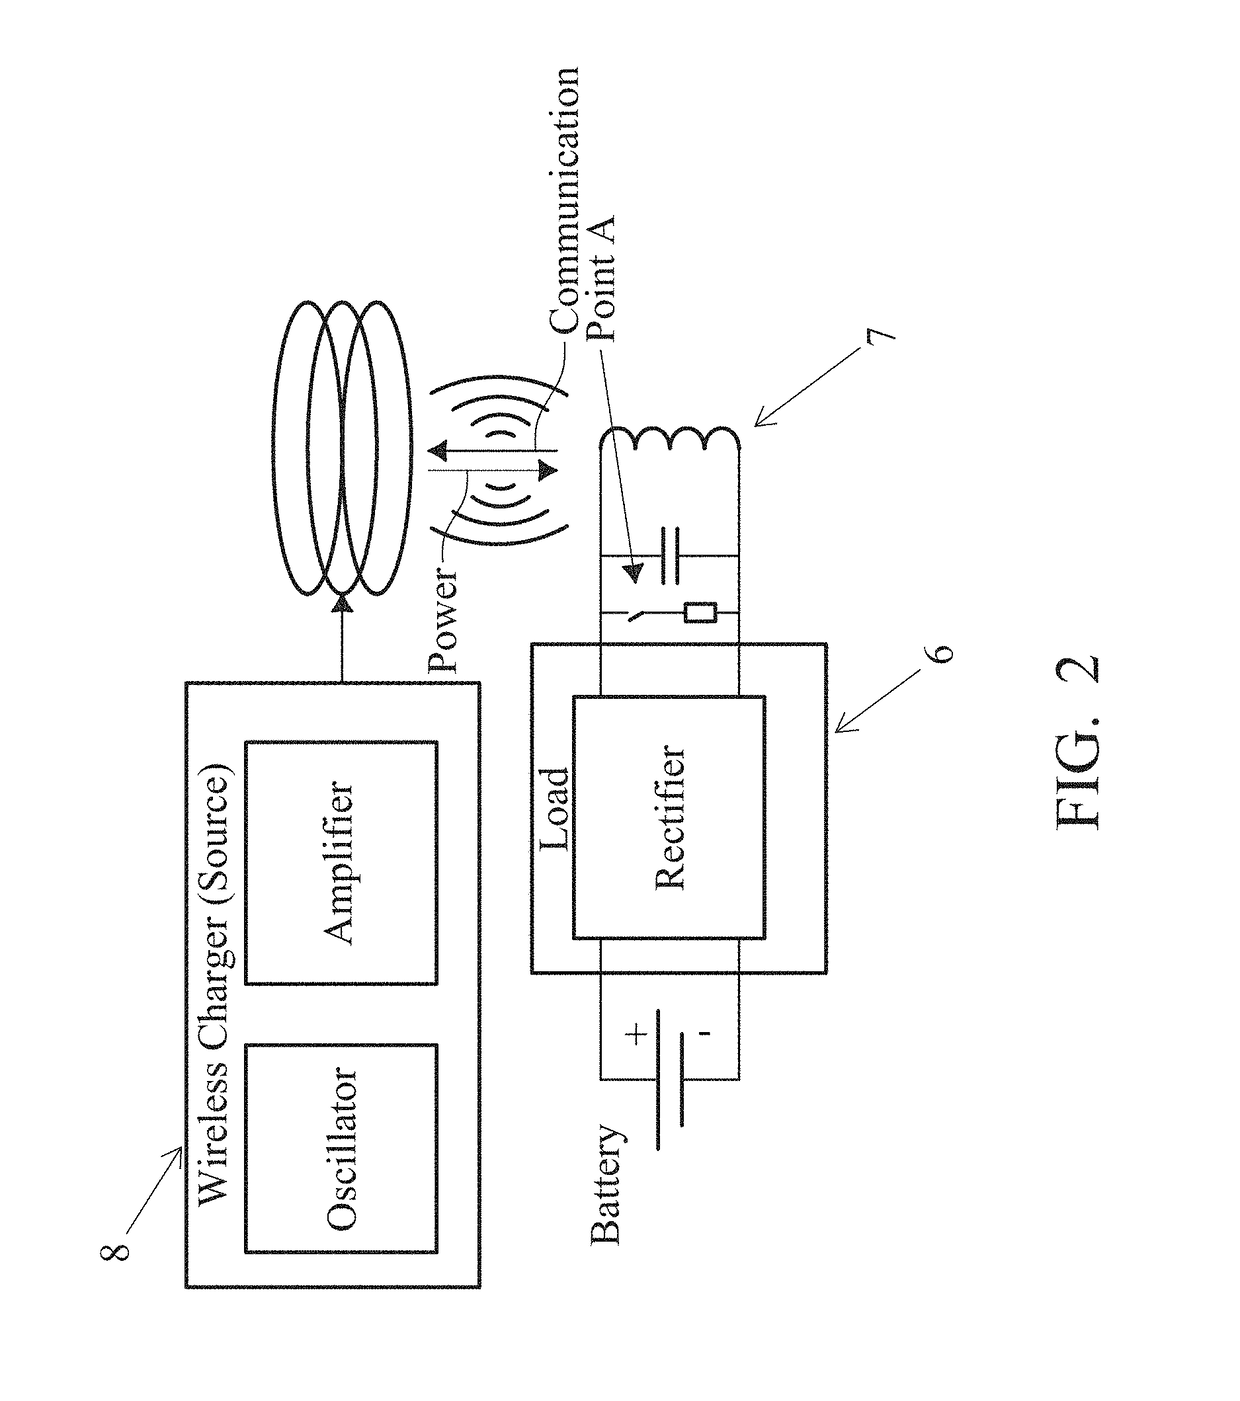 Foreign-object detection for resonant wireless power system